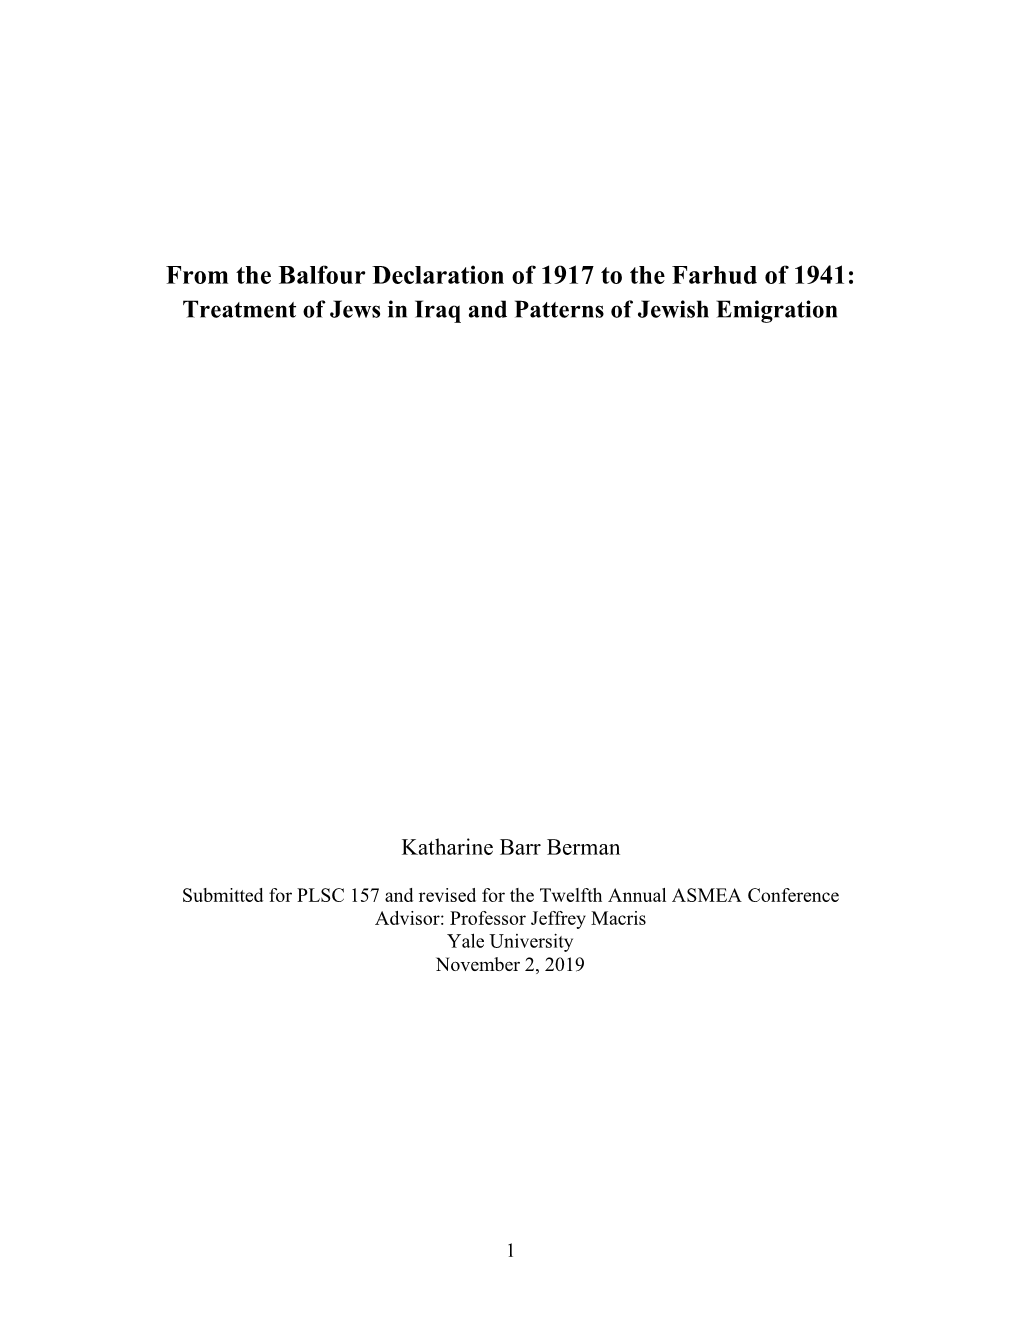 From the Balfour Declaration of 1917 to the Farhud of 1941: Treatment of Jews in Iraq and Patterns of Jewish Emigration